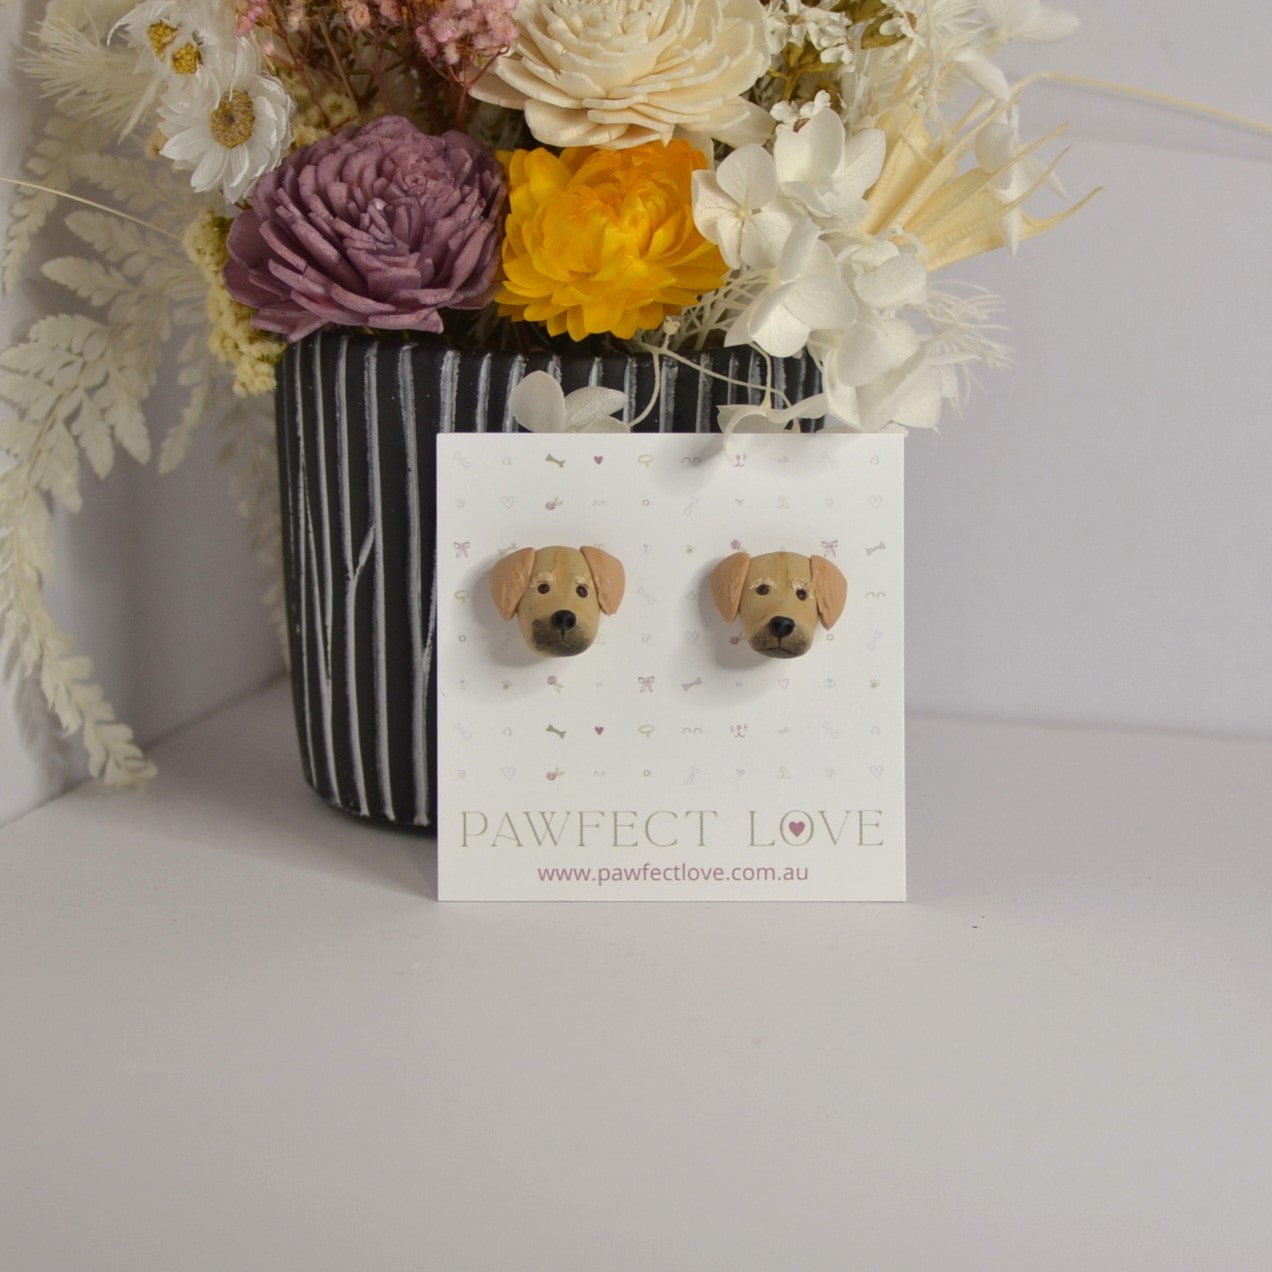 Handmade golden retriever stud earrings by Pawfect Love, positioned in front of dried flower arrangement